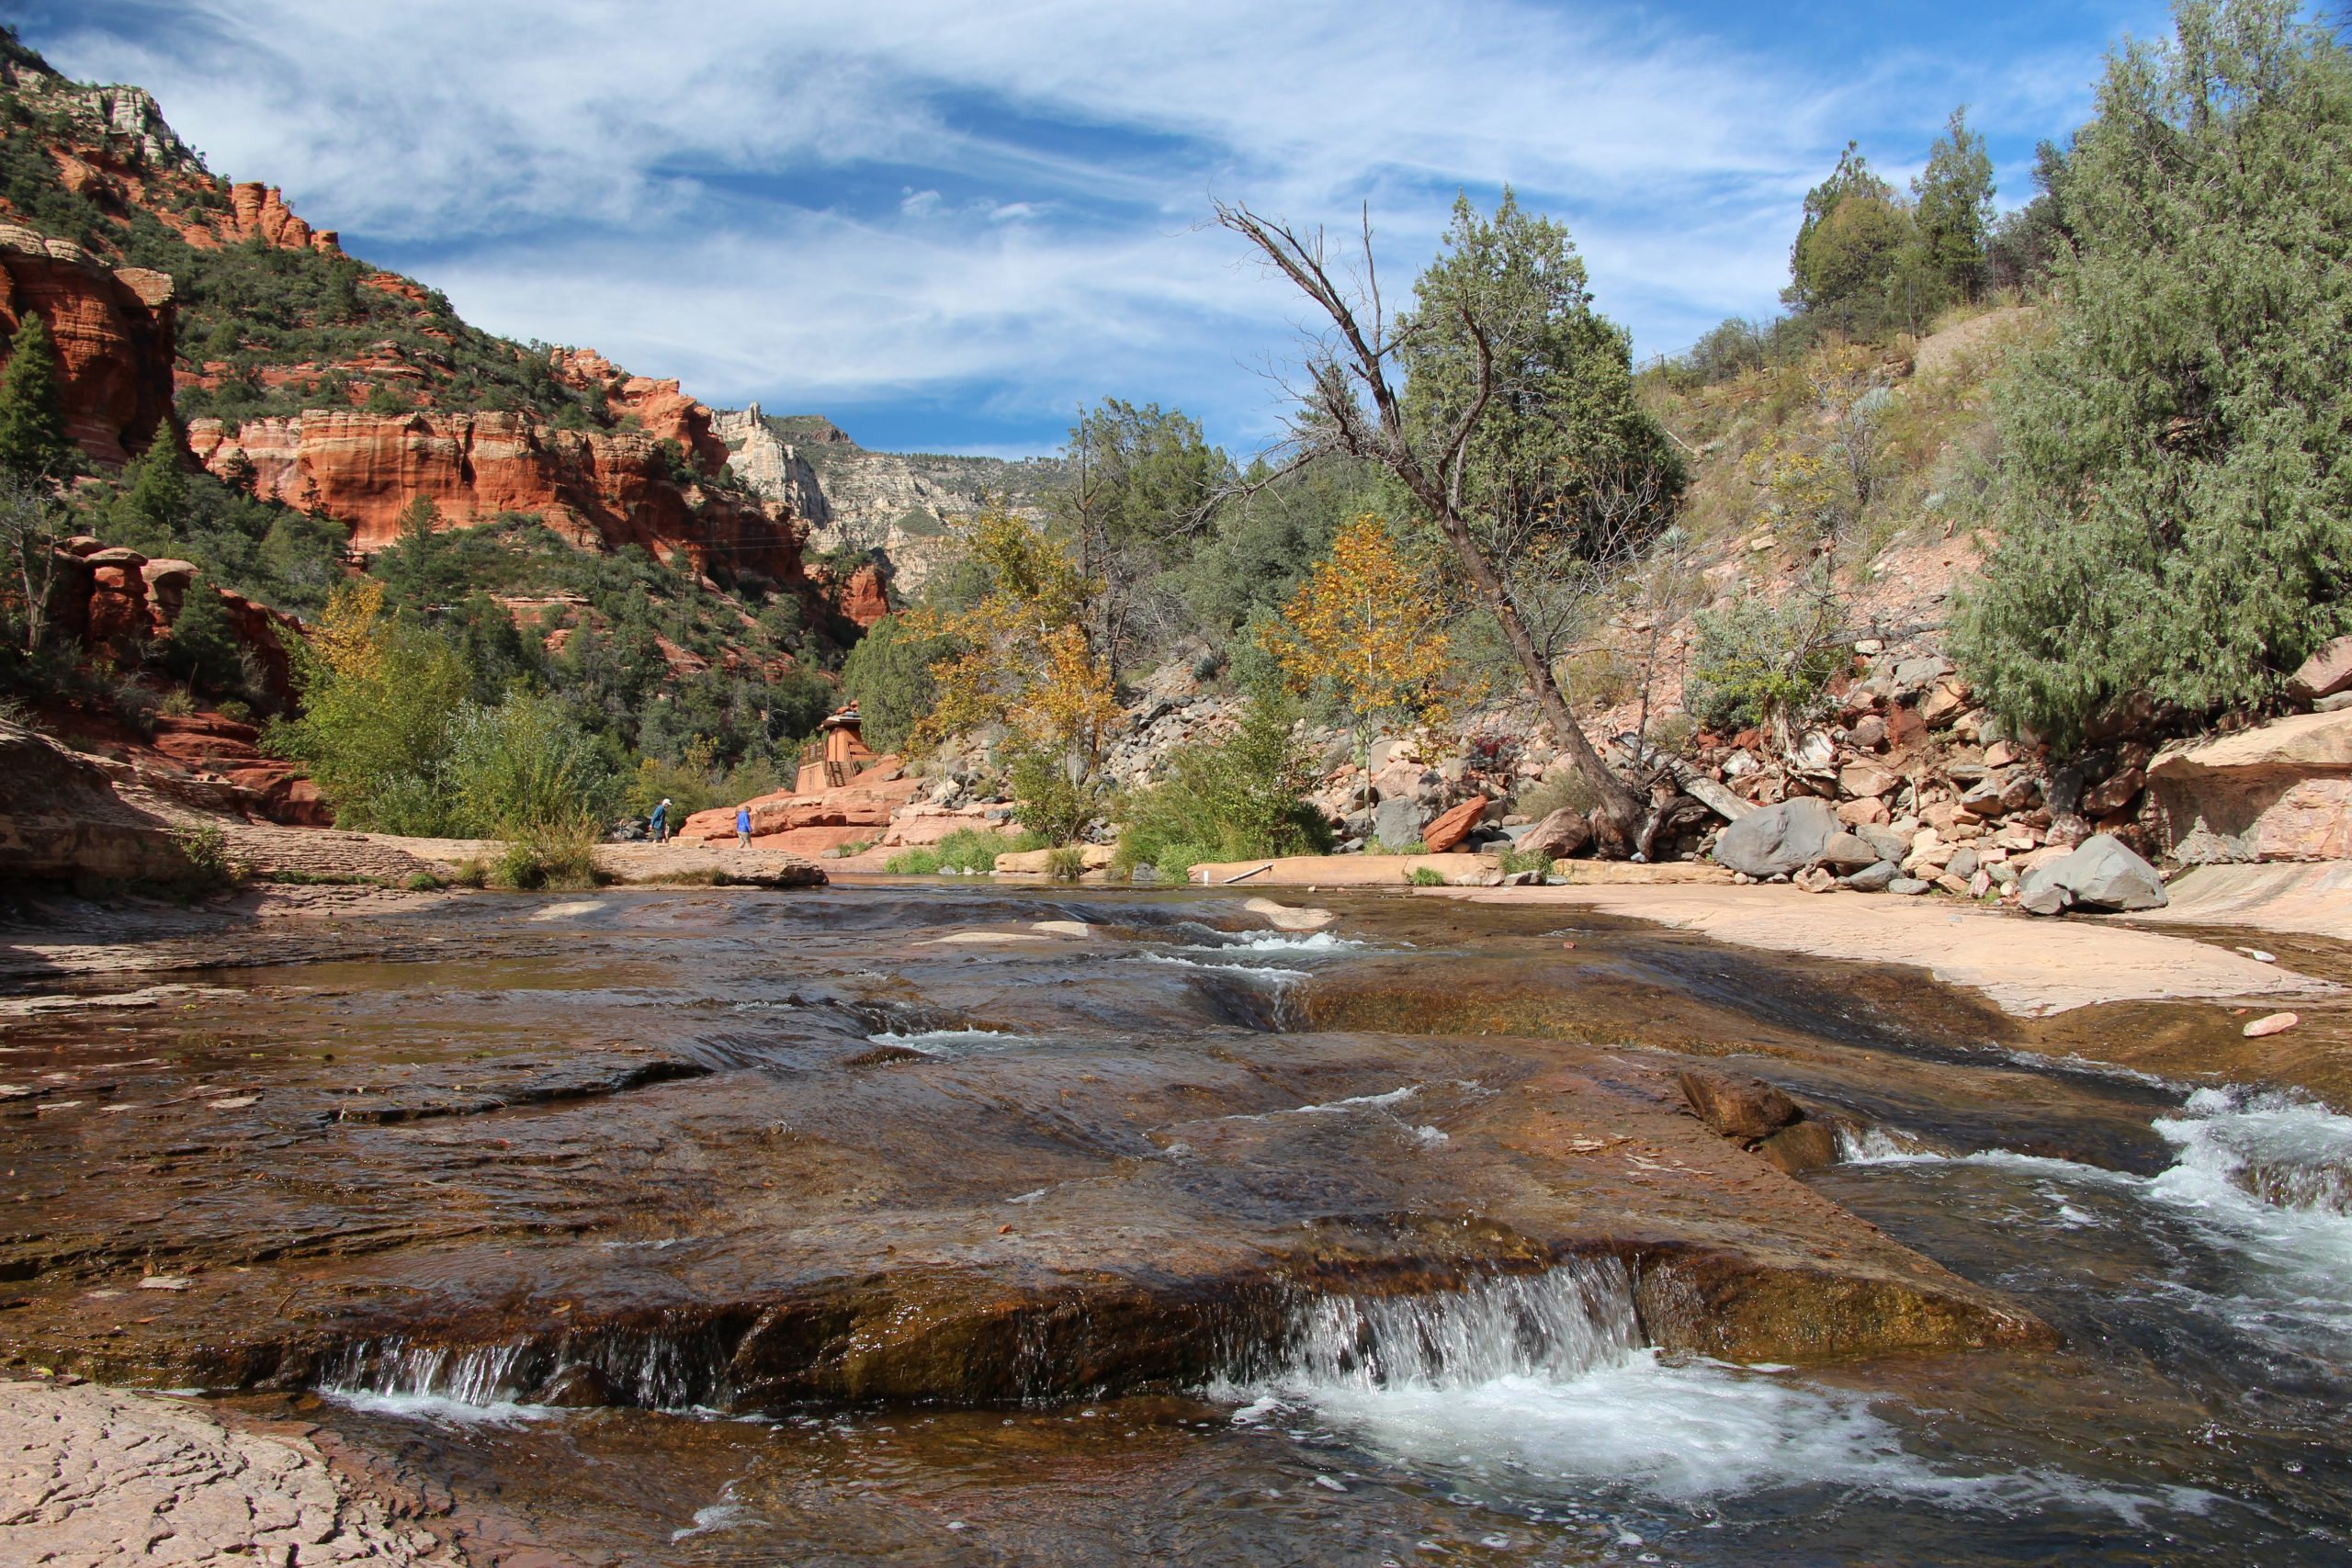 A shallow stream flows over a rocky bed with small waterfalls, bordered by trees and shrubs. The background features red rock formations and a partly cloudy blue sky, creating a picturesque scene that looks like it could be straight out of a series of nature pictures.